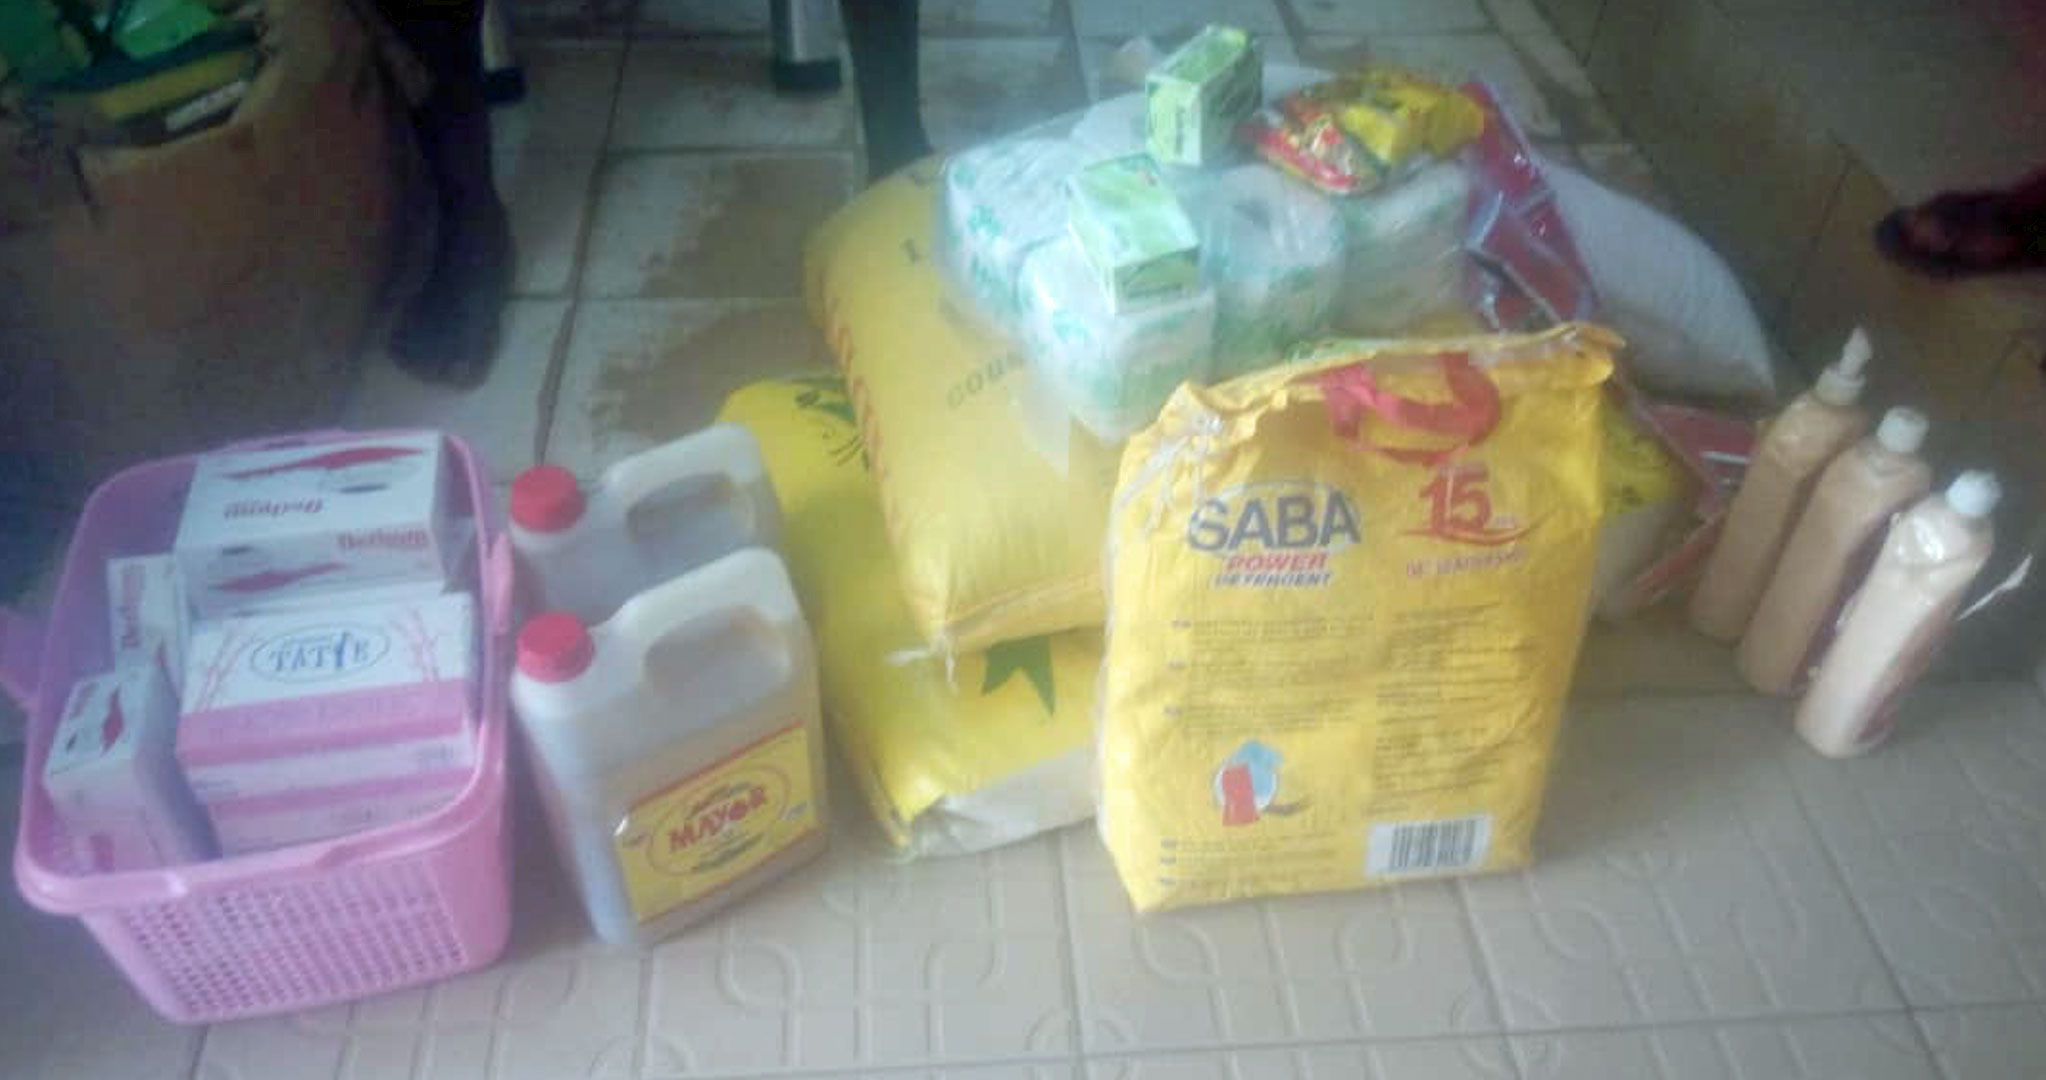 Generous donors paid for this supplementary food and hygiene items which will have to last for two months for three gay prisoners in Cameroon: rice, detergent, pasta, packets of peanuts, cooking oil, sugar, anti-septic soap, bags of tomatoes, tapioca, bleach, shrimp flavor cubes, salt and toilet paper. (Photo by AJFG)